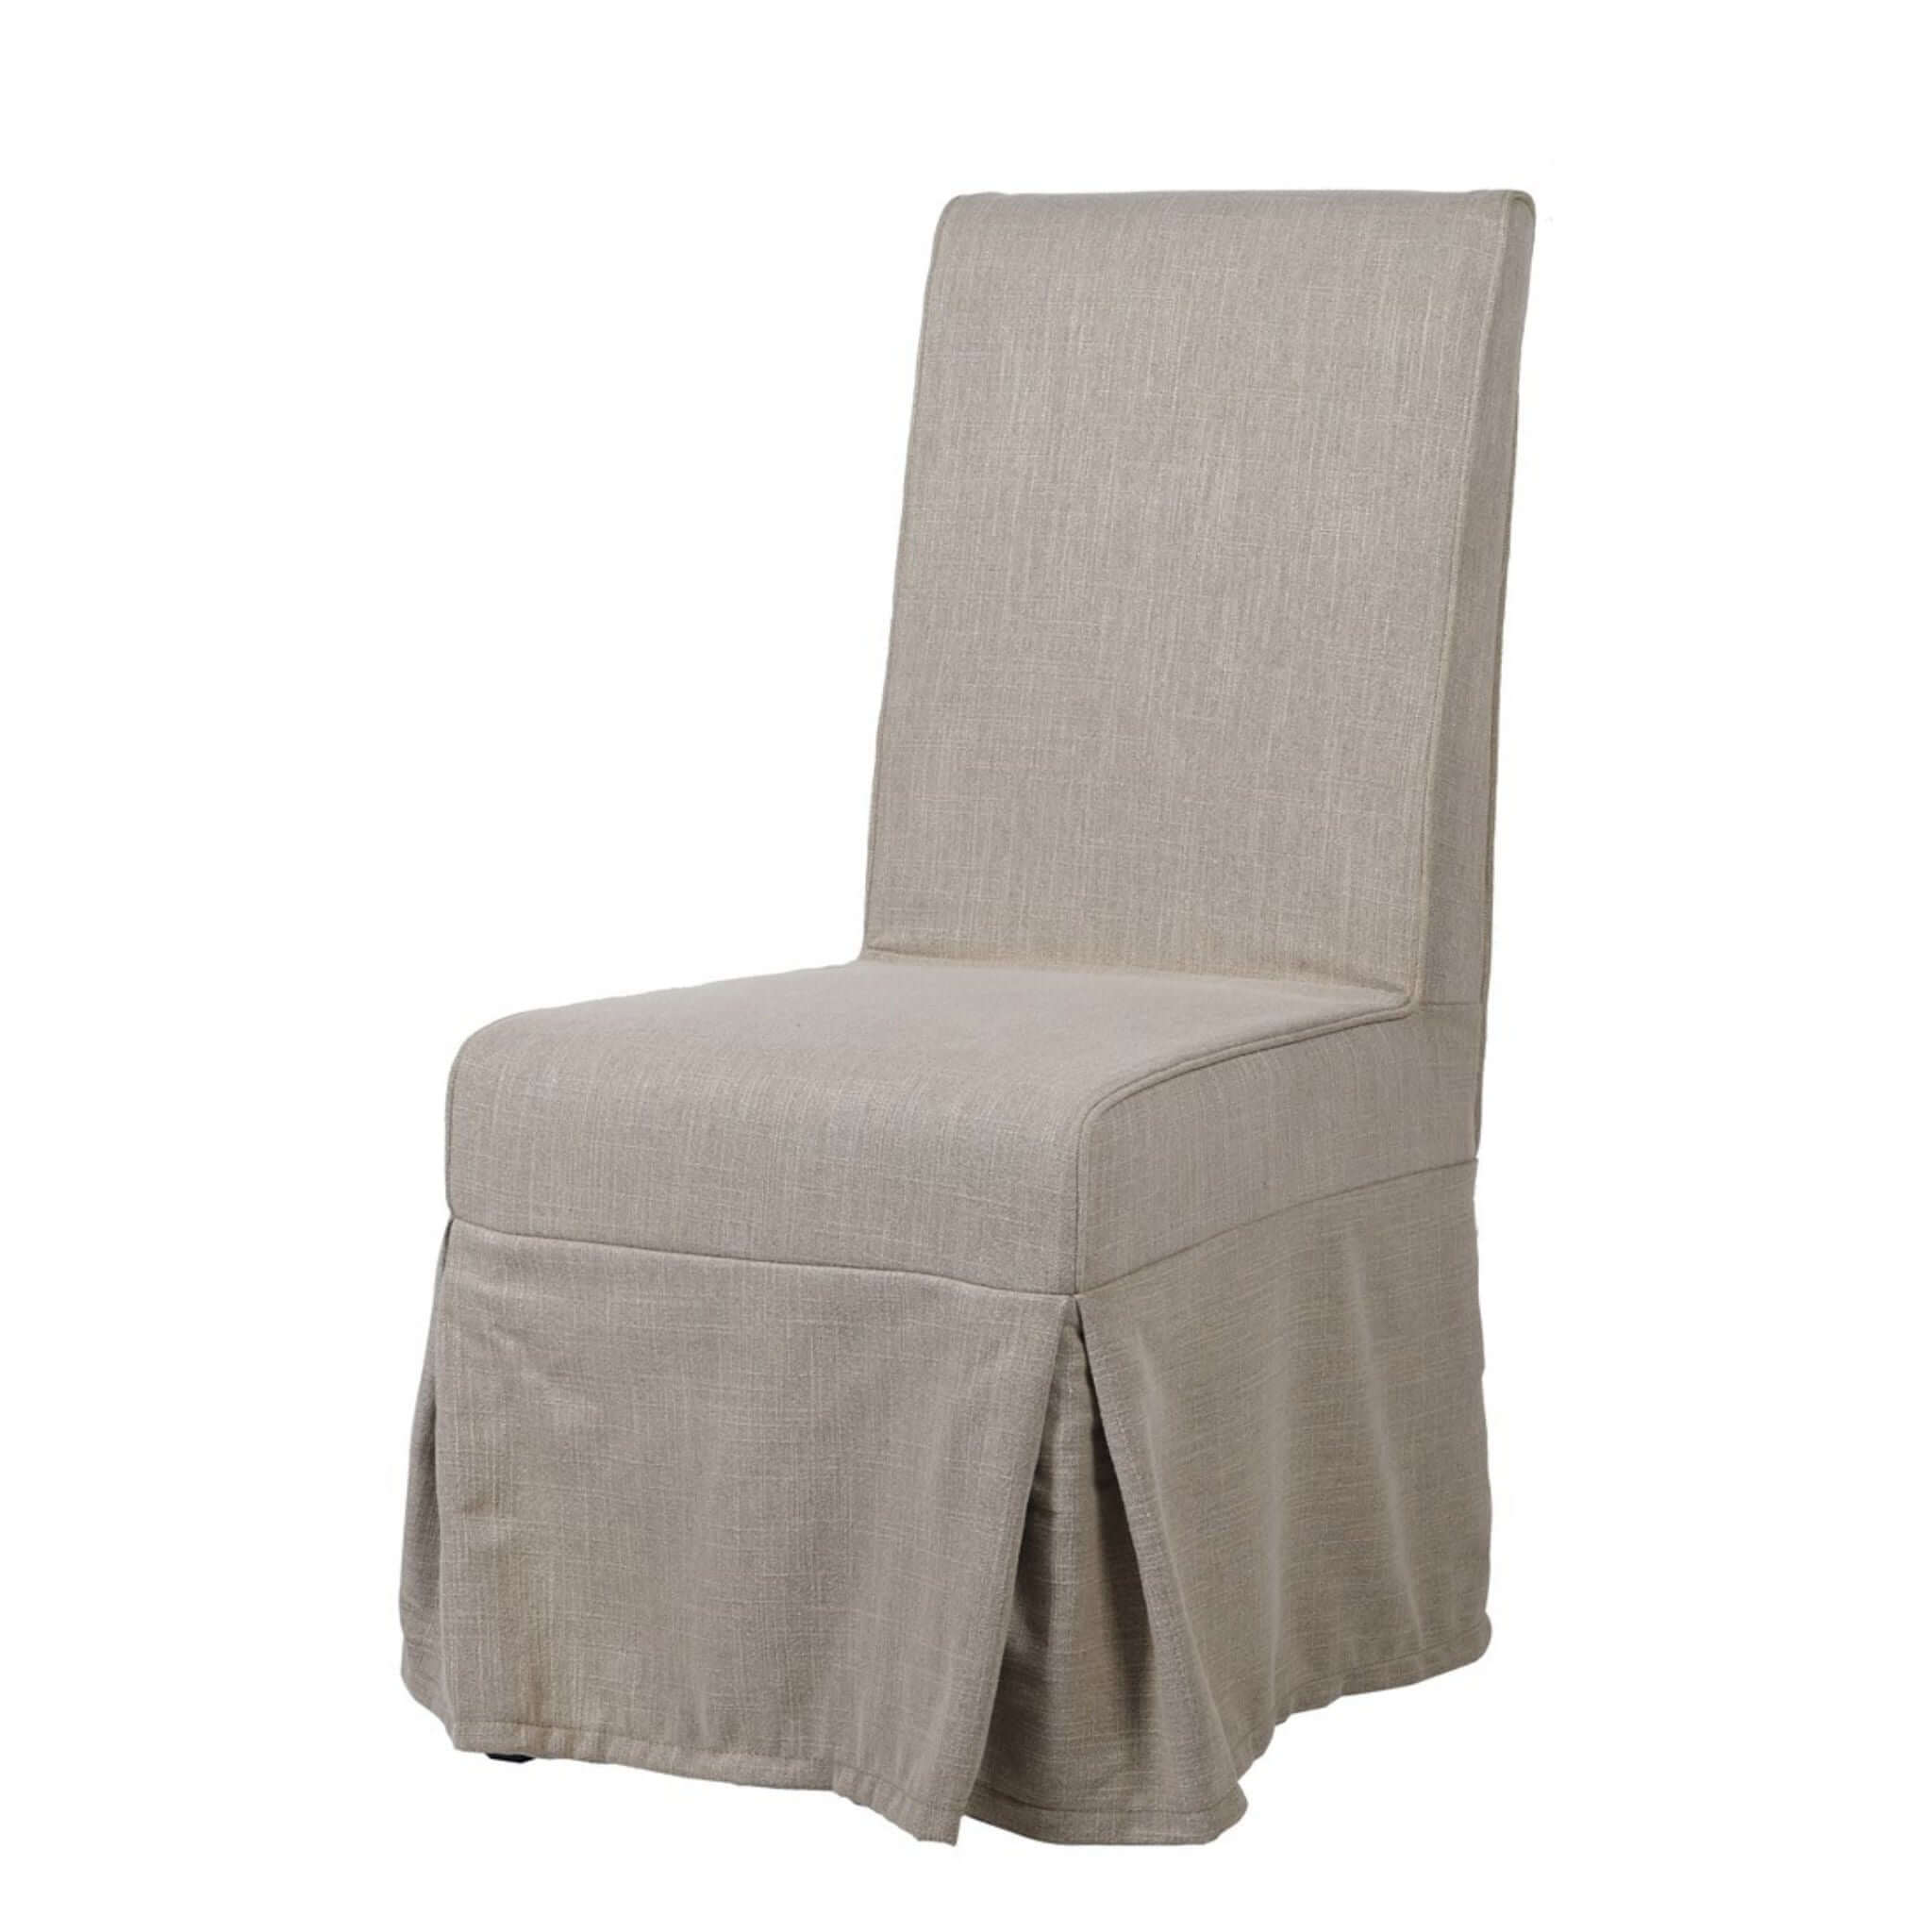 Yealm Loose Cover Dining Chair - Natural - escapologyhome.co.uk